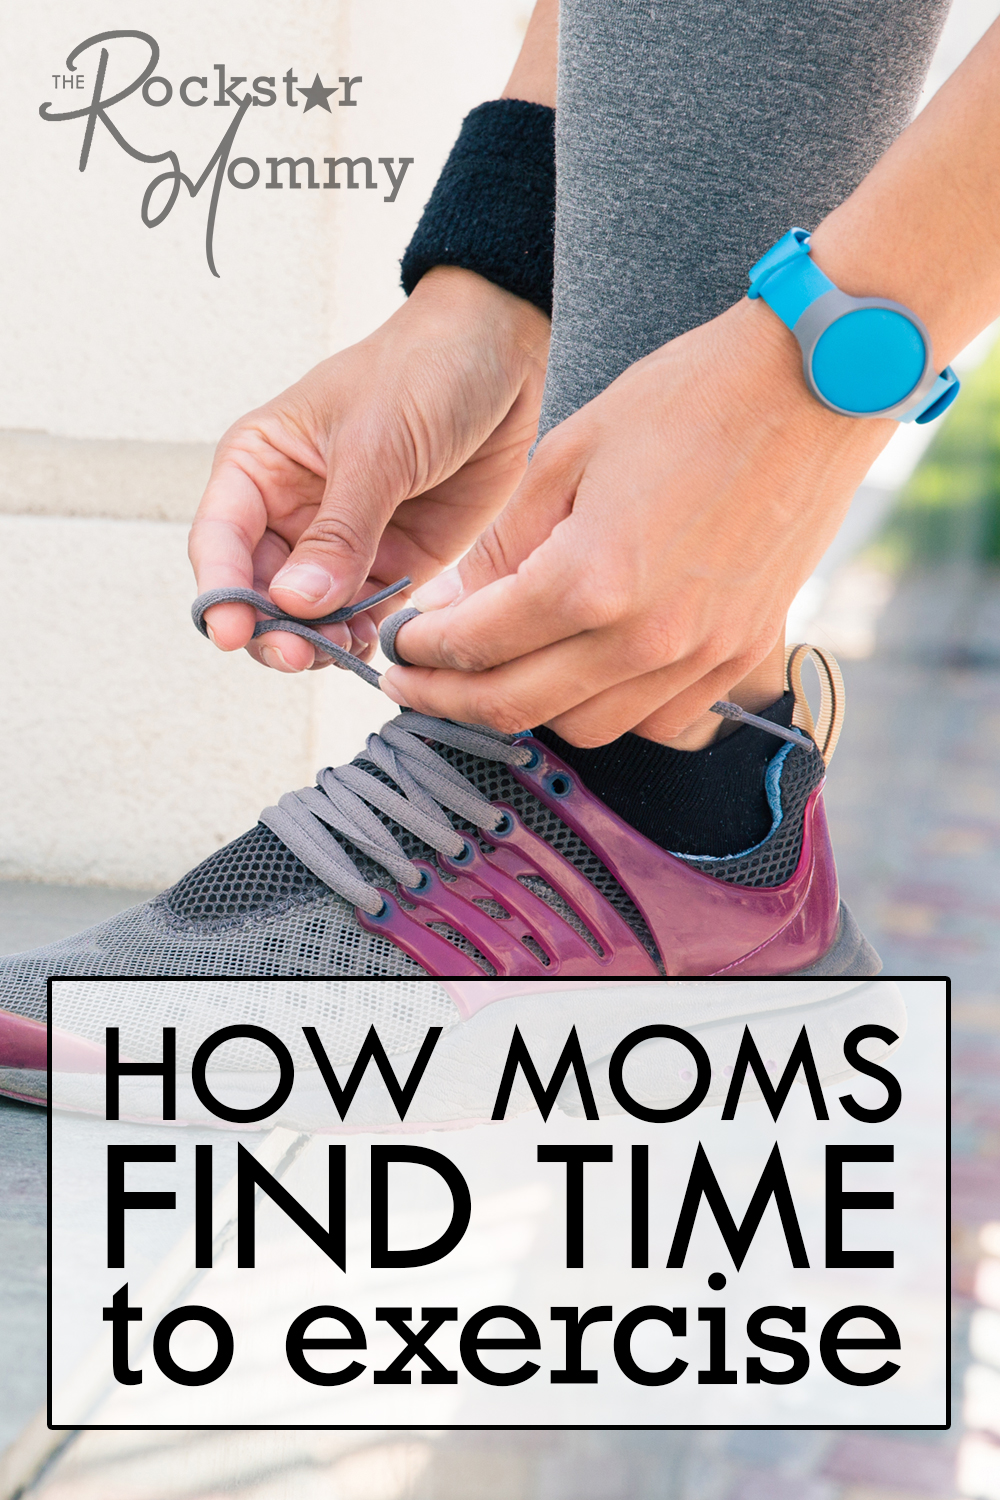 How Do Moms Find Time to Exercise?